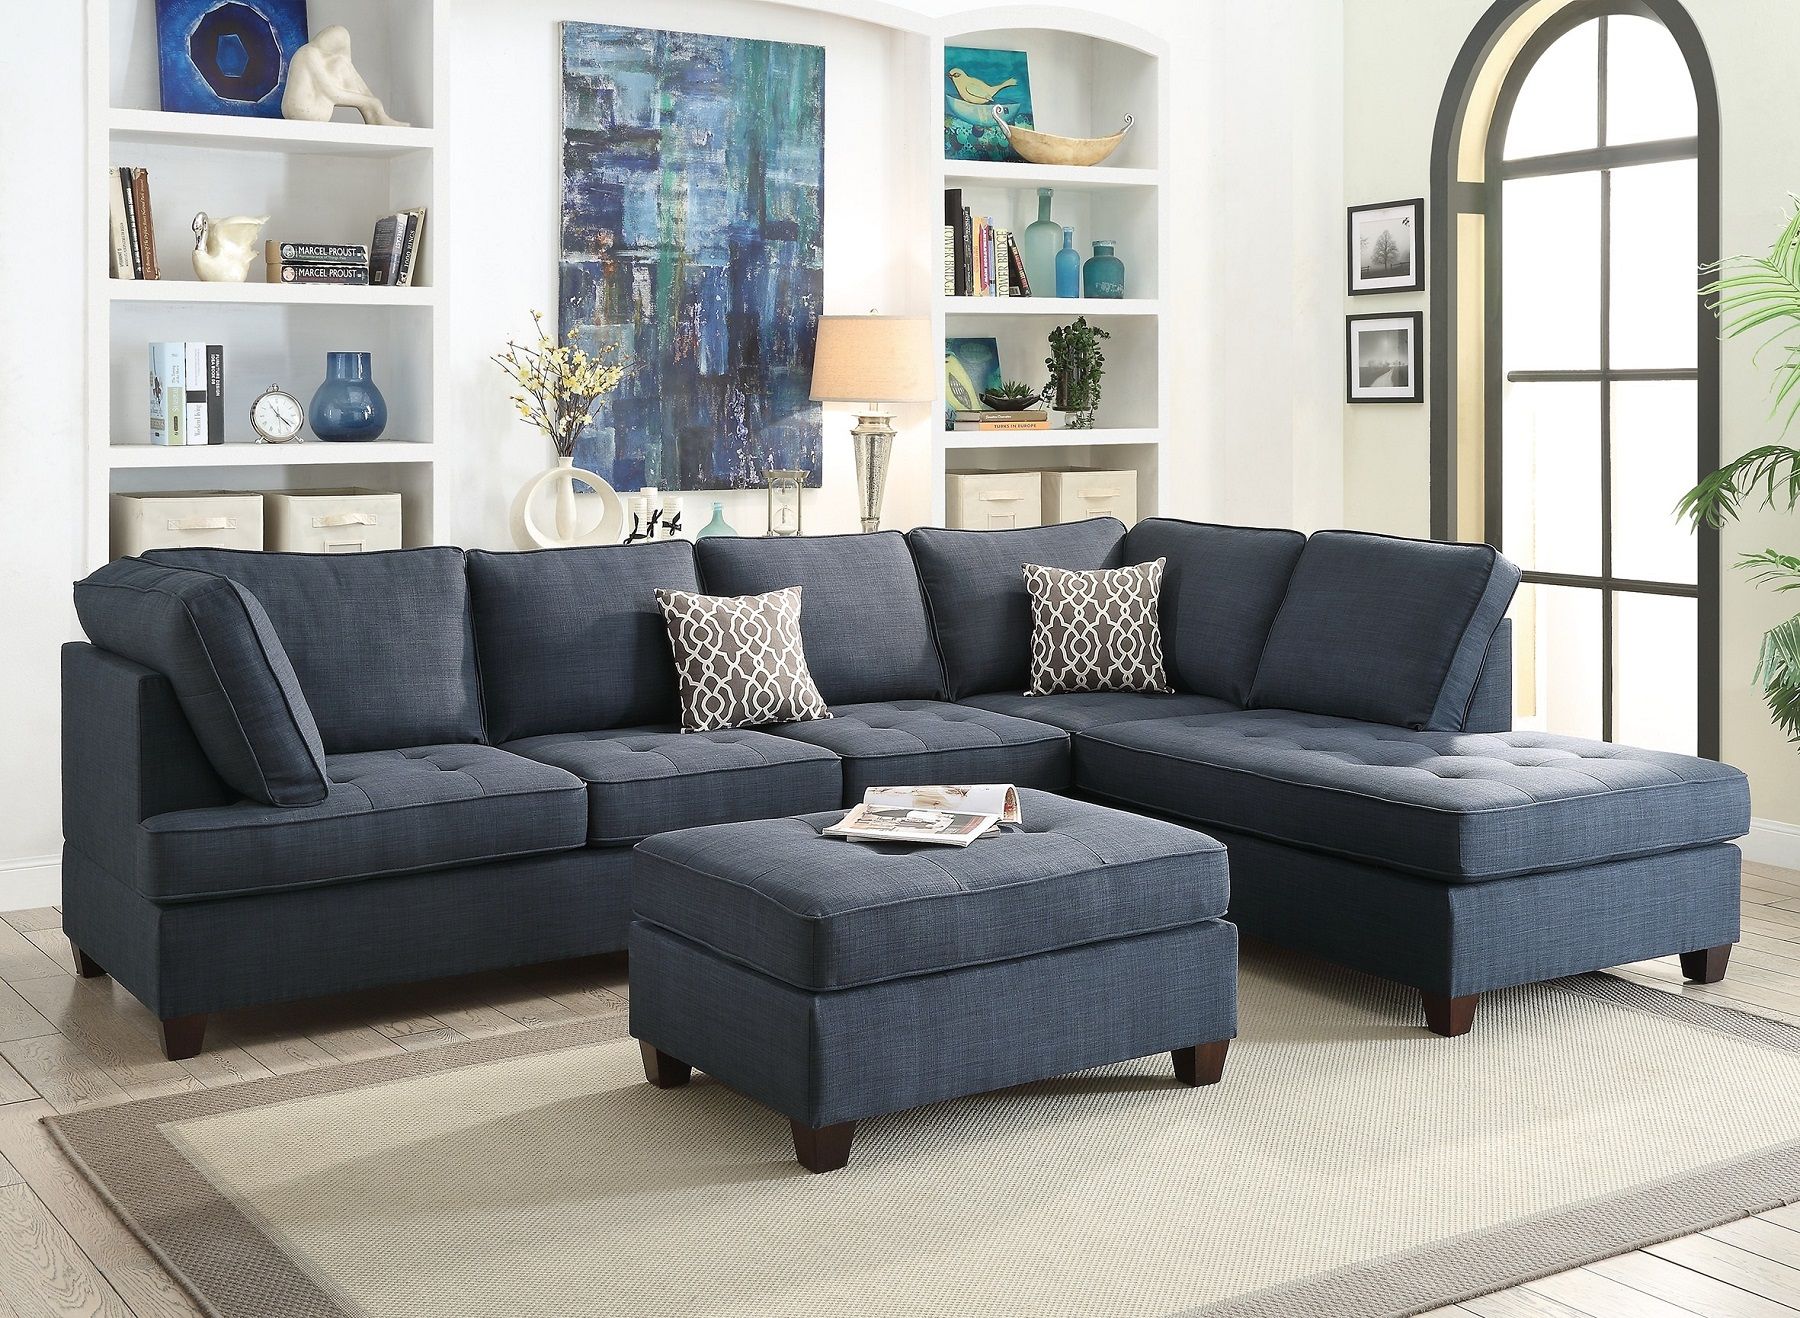 Blue Sectional Sofa Chaise Poundex #f6989 | Hot Sectionals For 4pc Crowningshield Contemporary Chaise Sectional Sofas (View 9 of 15)